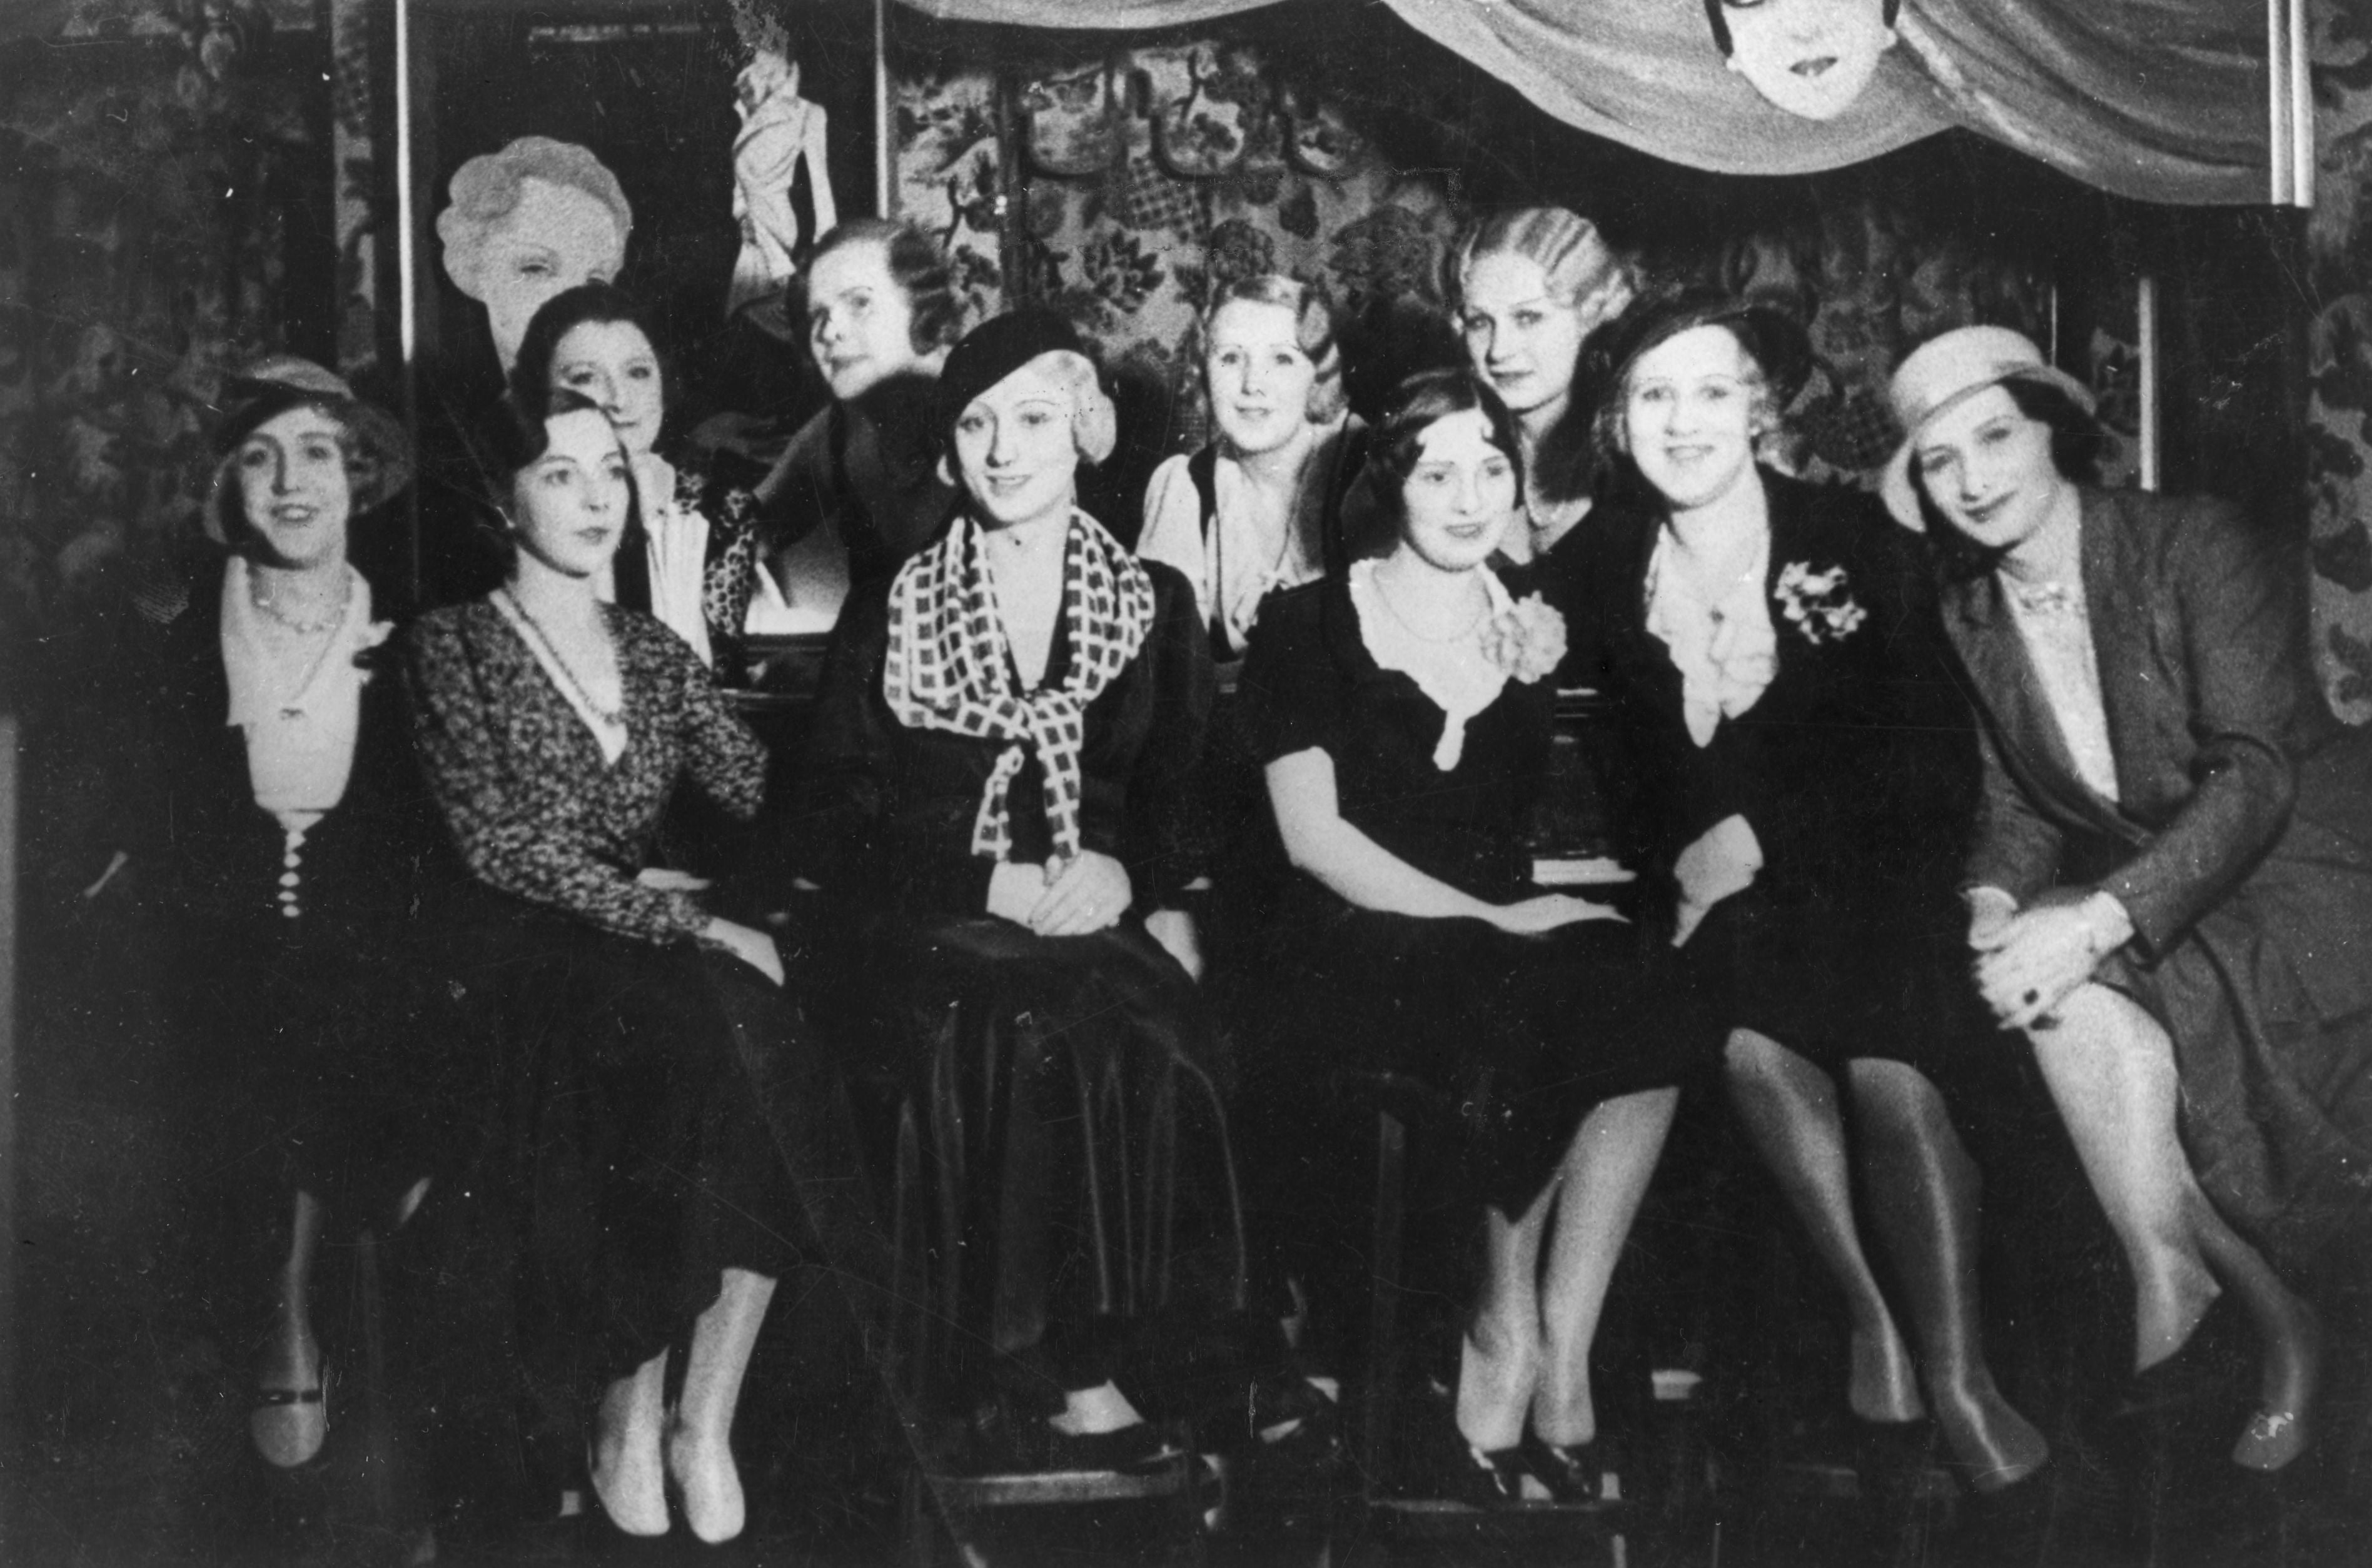 The Eldorado nightclub in Berlin's Schoneberg district was a popular night spot for gay people and transvestites during the Weimar years